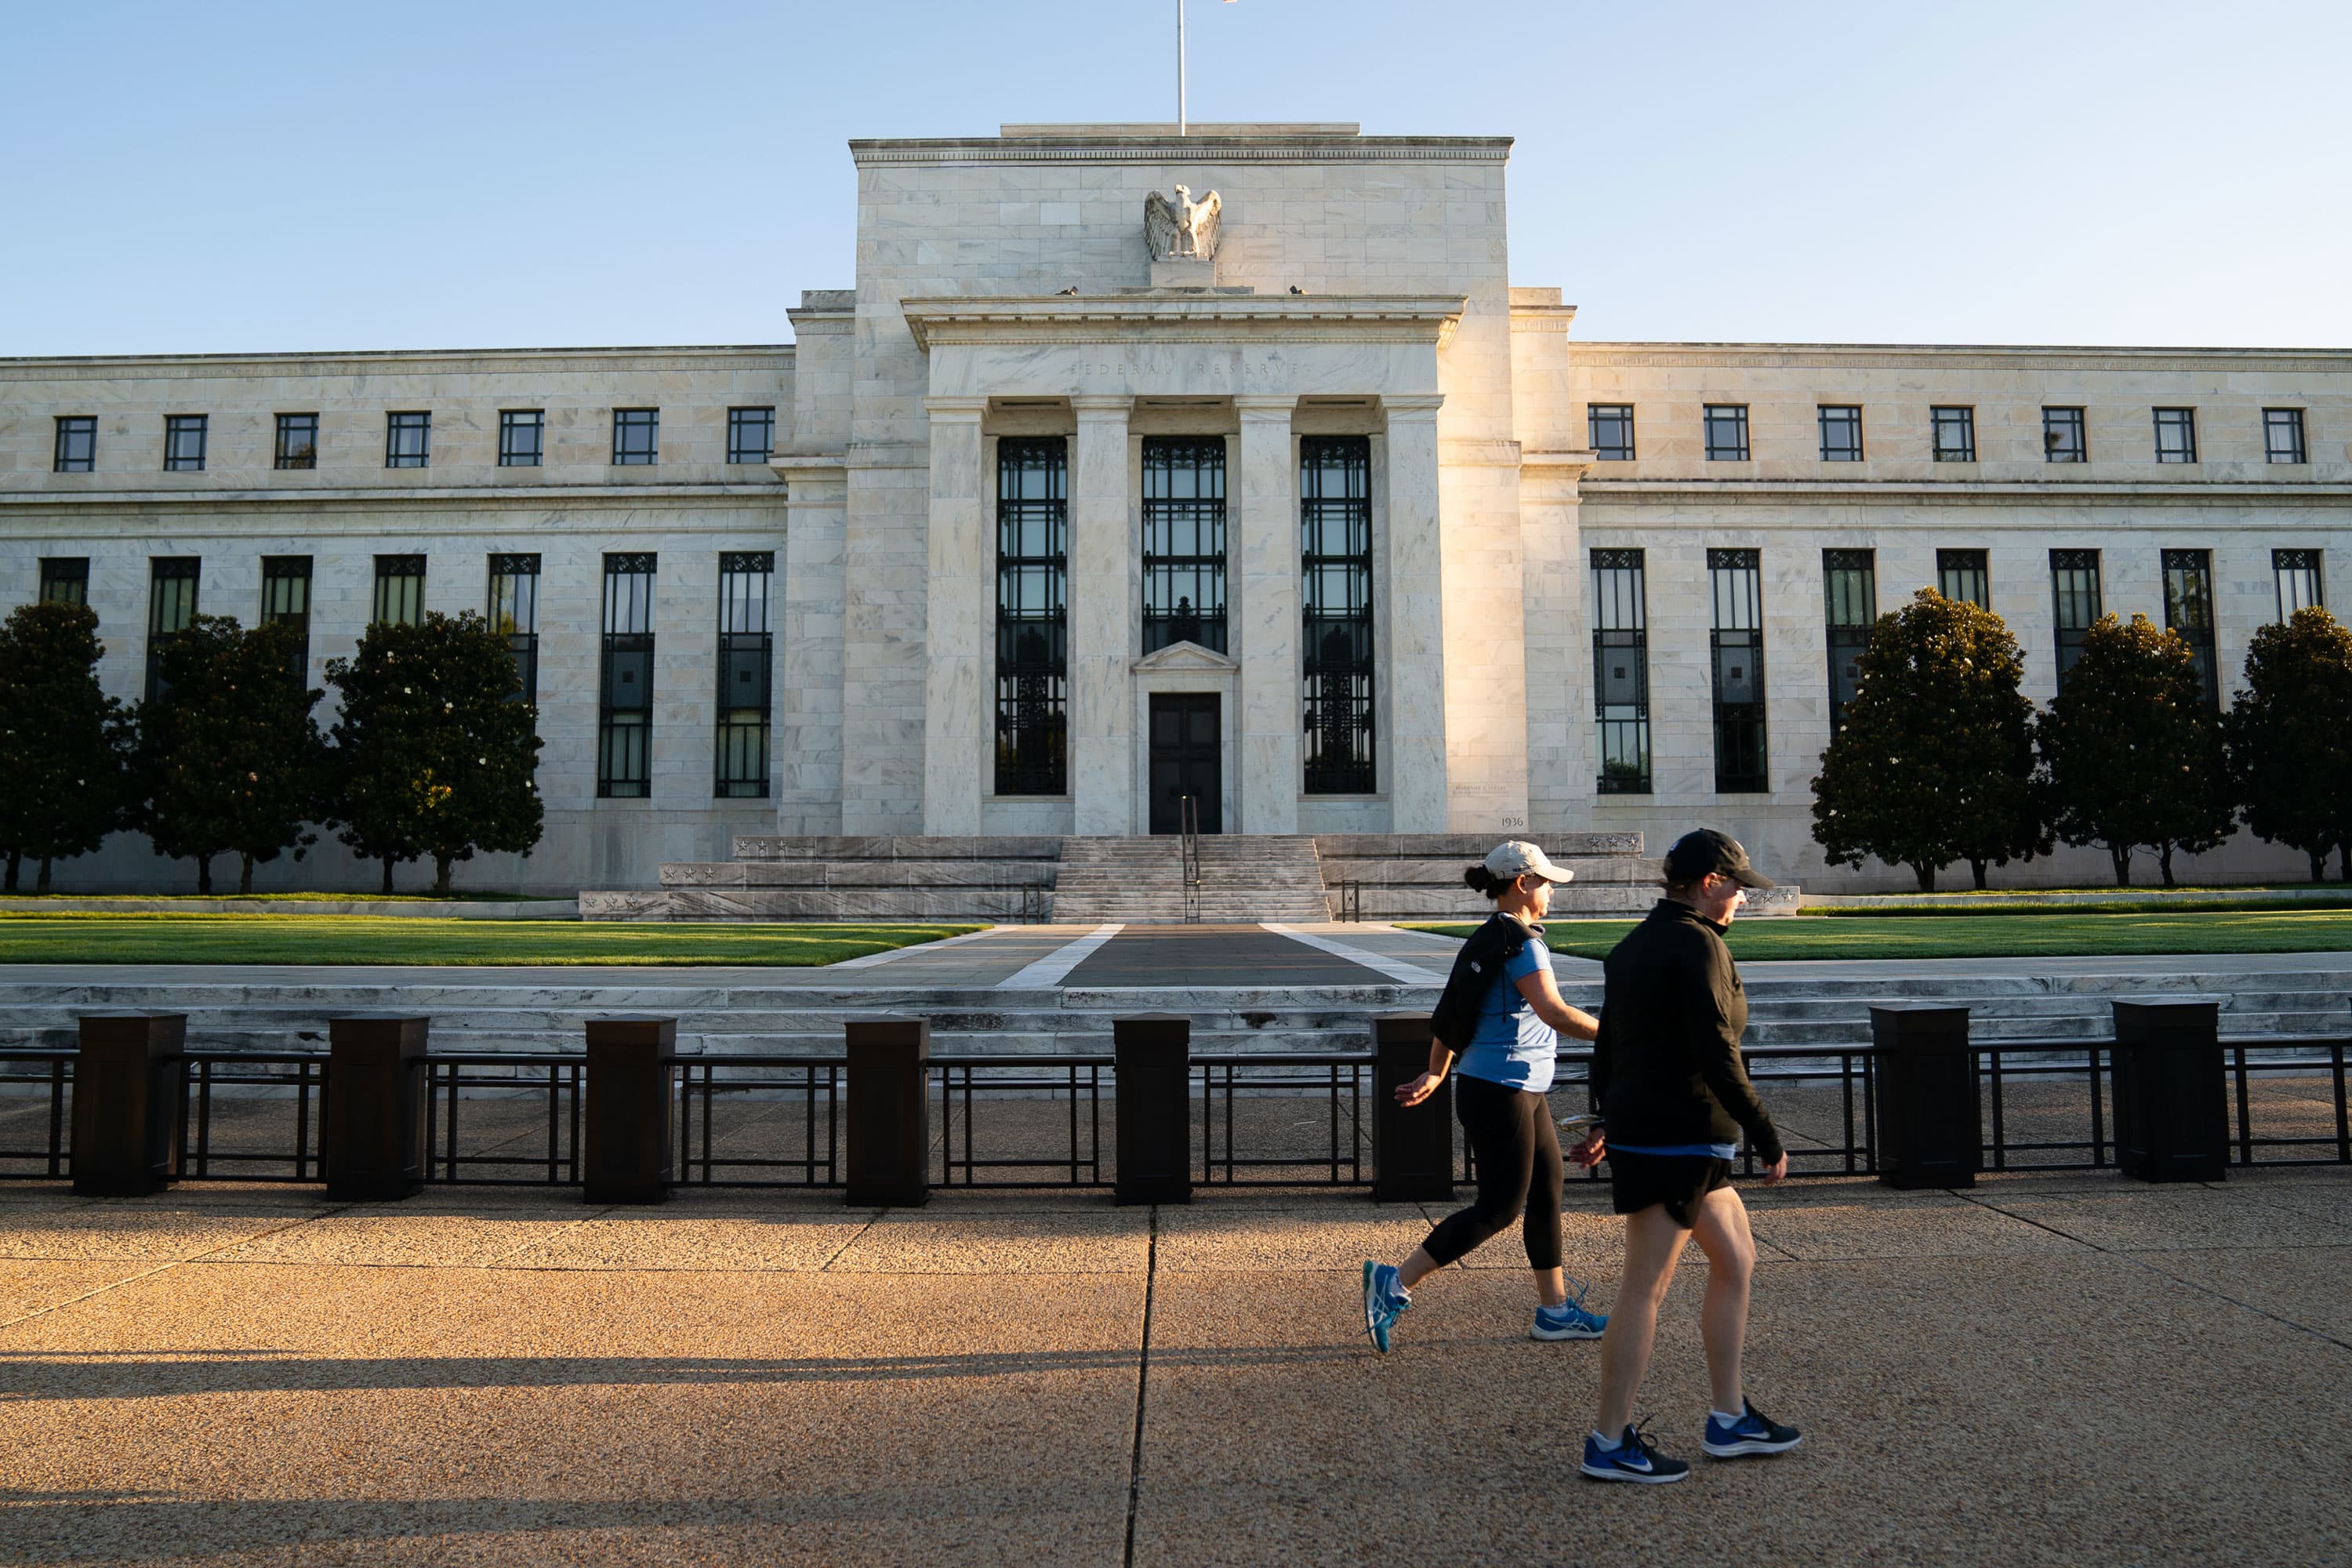 Stocks at record highs while investors wait for Fed guidance – what to look for